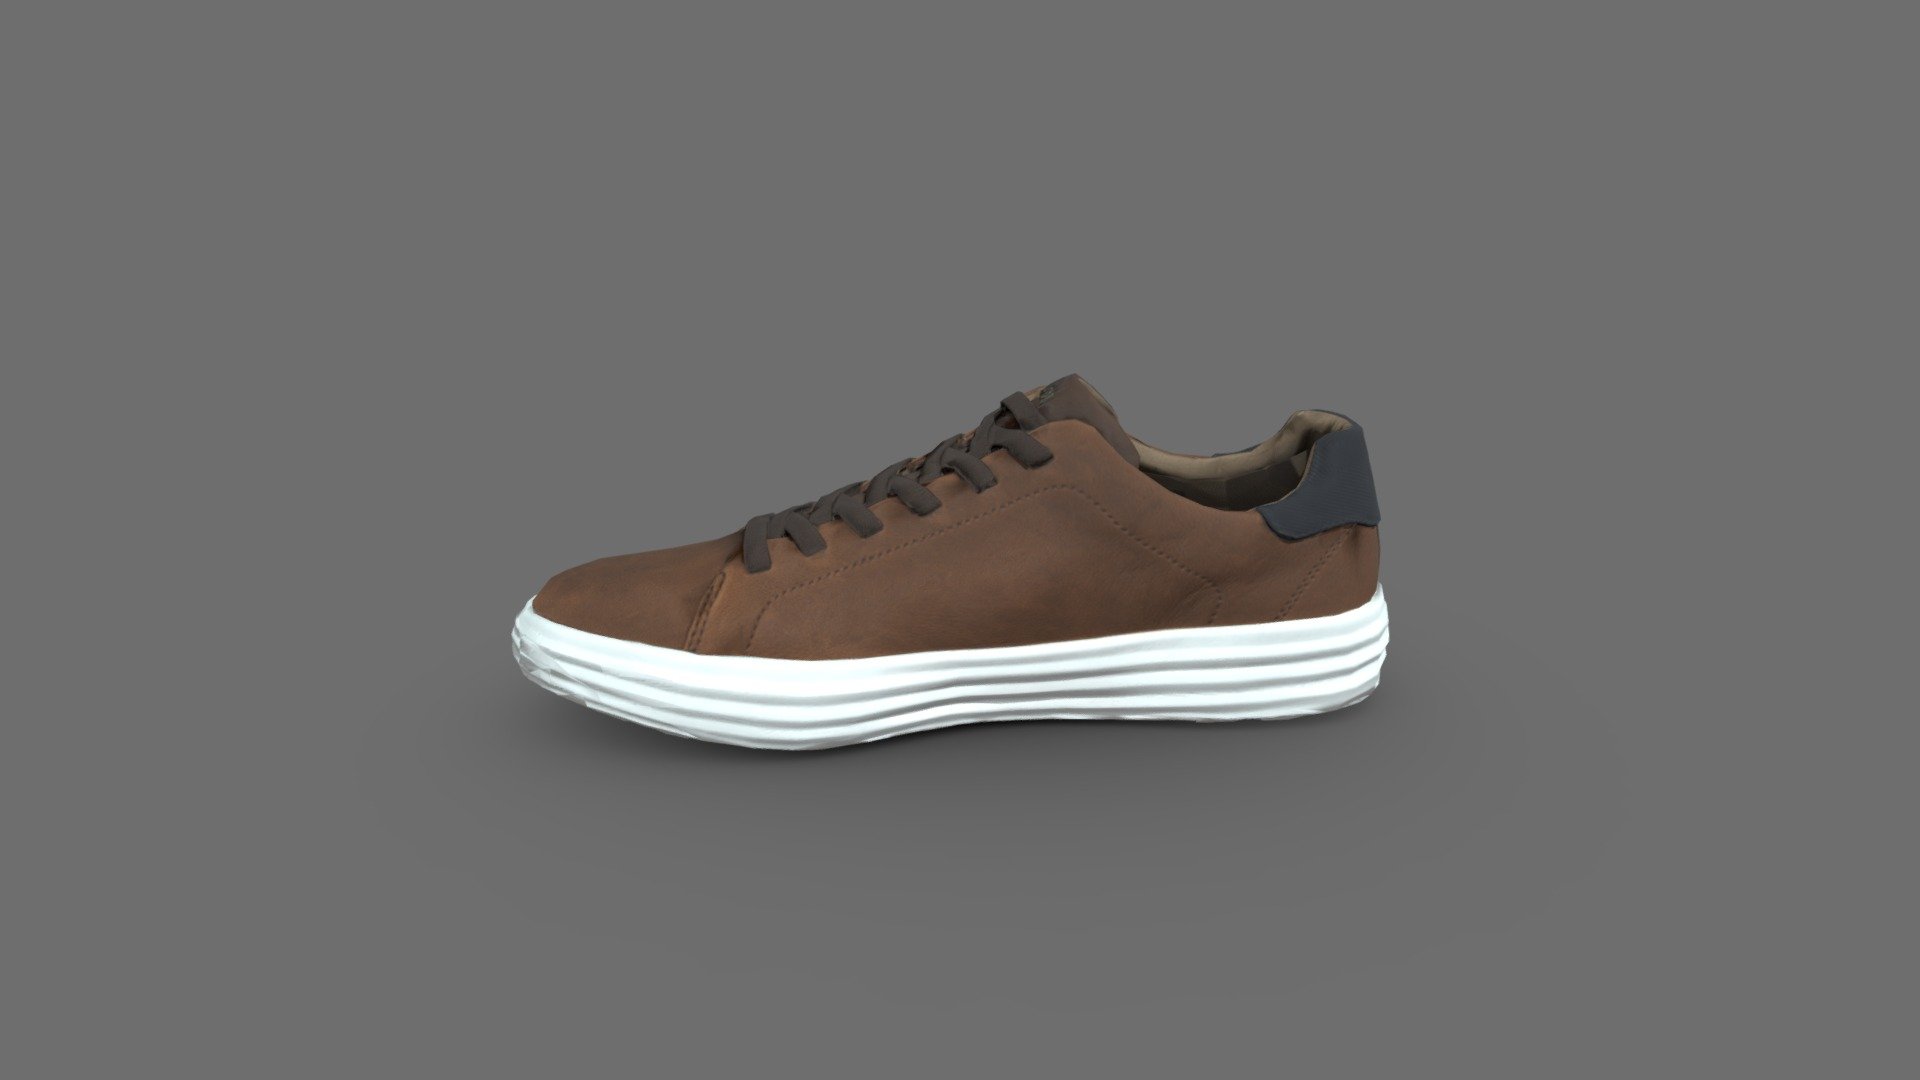 Mark Nason shoe. Scanned at 2.3 million polys. Decimated, and geo clean up in 3ds Max. Texture tweaks in Substance 3d model